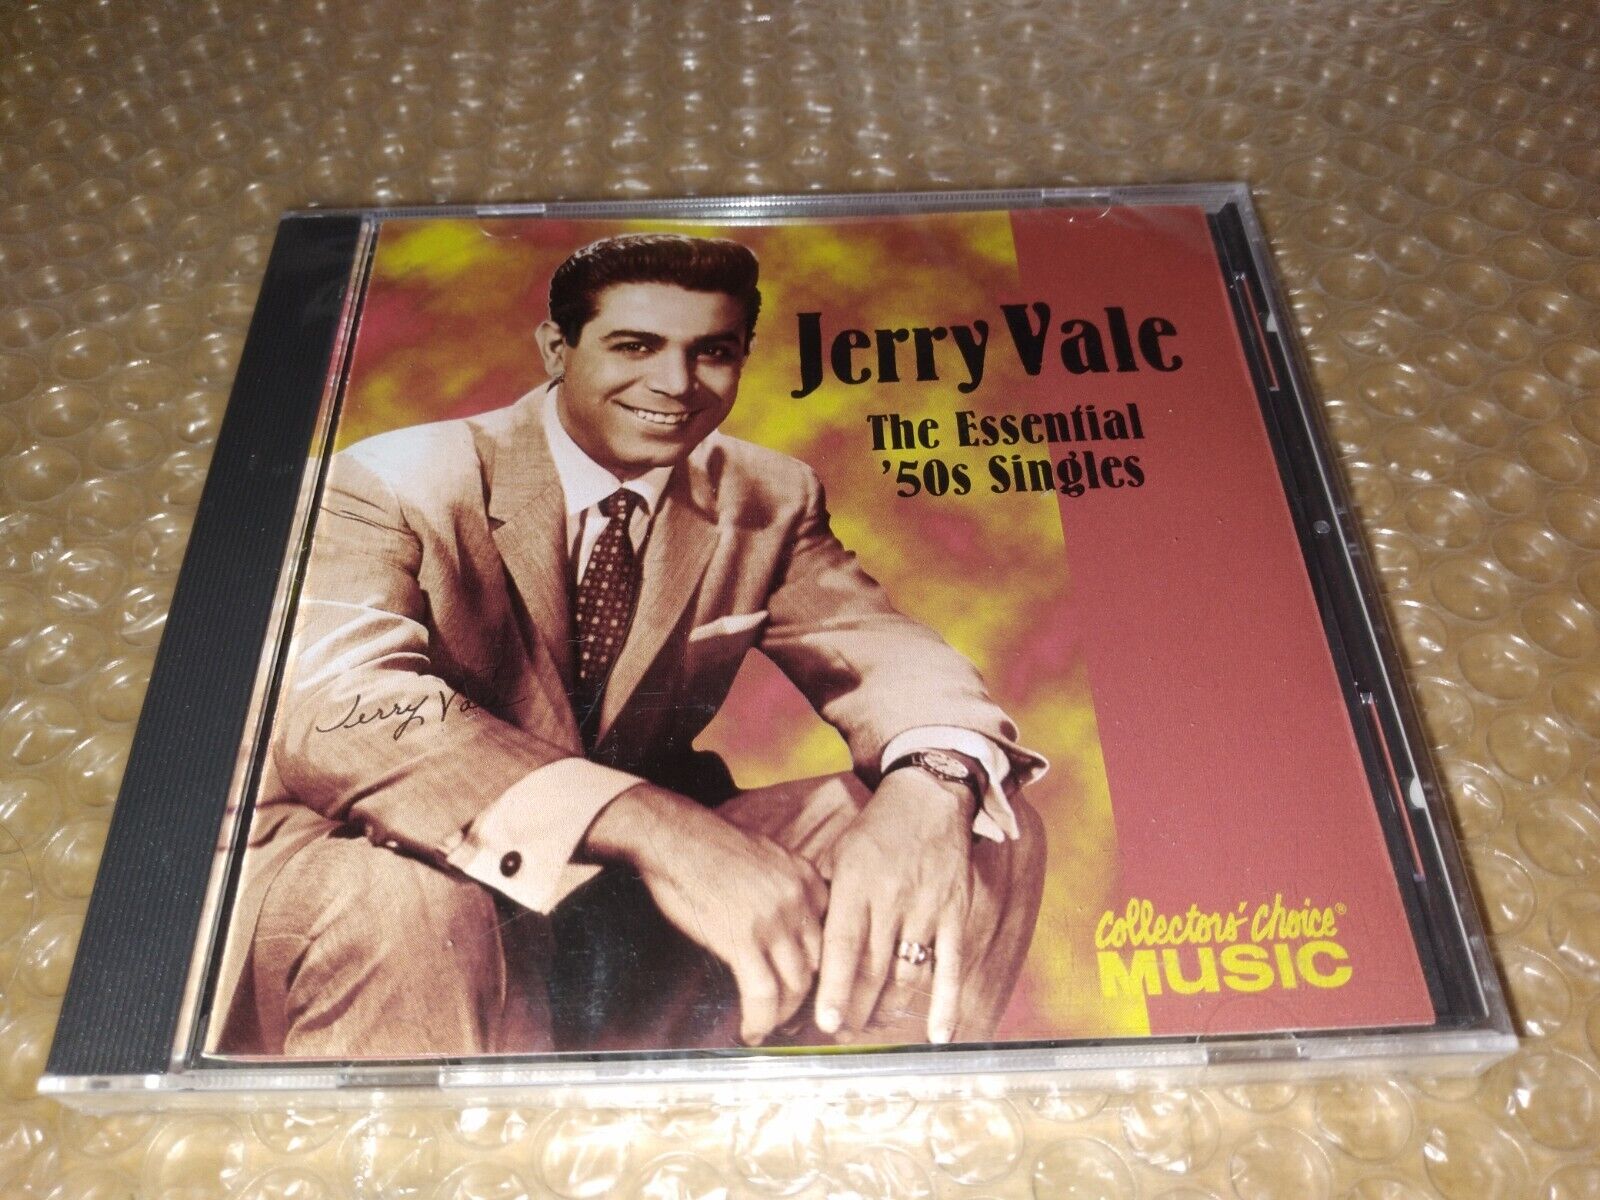 Jerry Vale The Essential 50s Singles CD Collectors' Choice NEW 617742021721